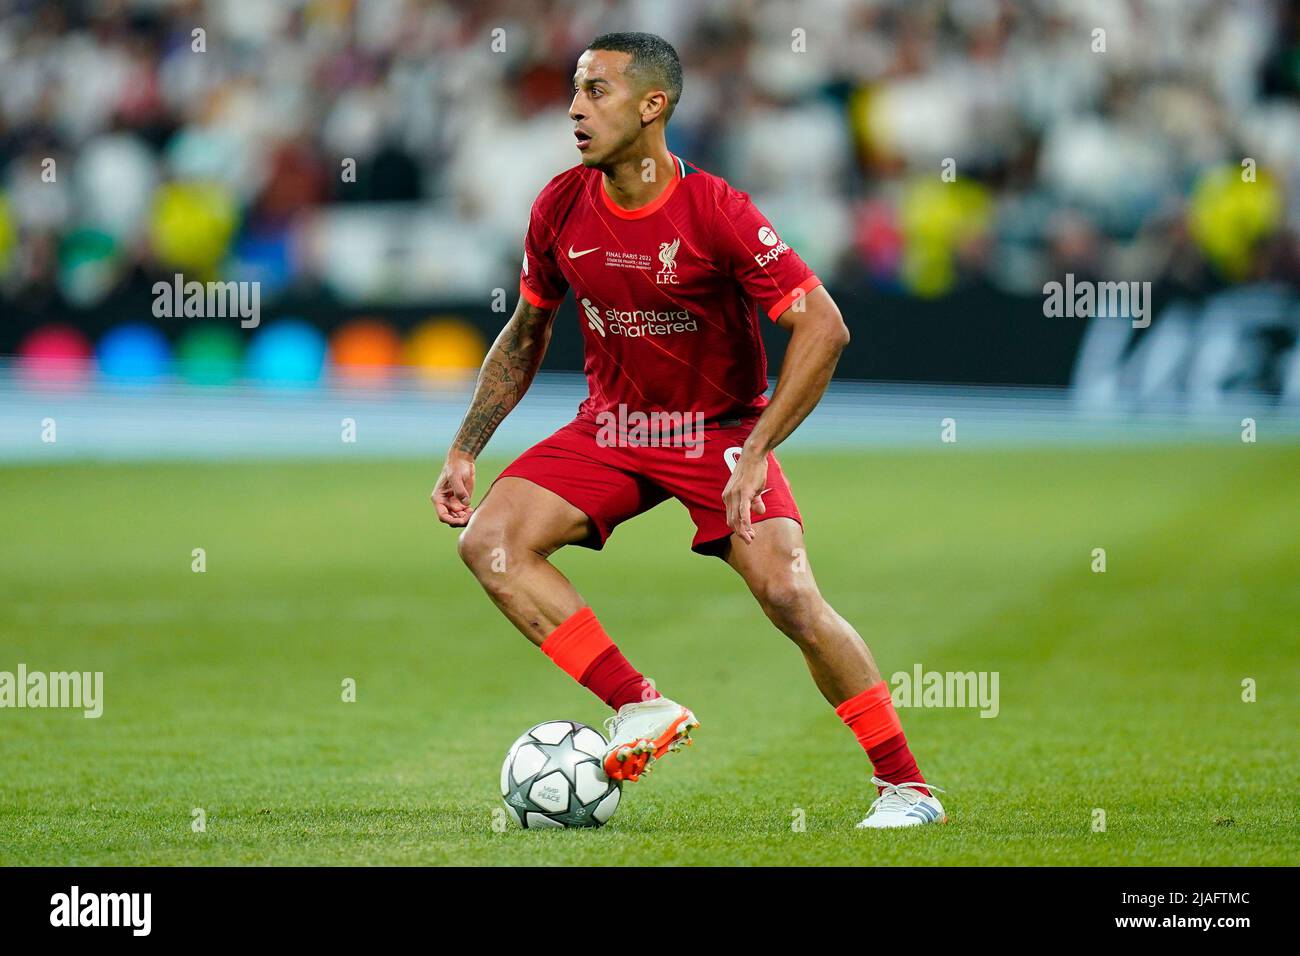 Thiago Alcantara of Liverpool FC during the UEFA Champions League Final match between Liverpool FC and Real Madrid played at Stade de France on May 28, 2022 in Paris, France. (Photo / Magma) Stock Photo